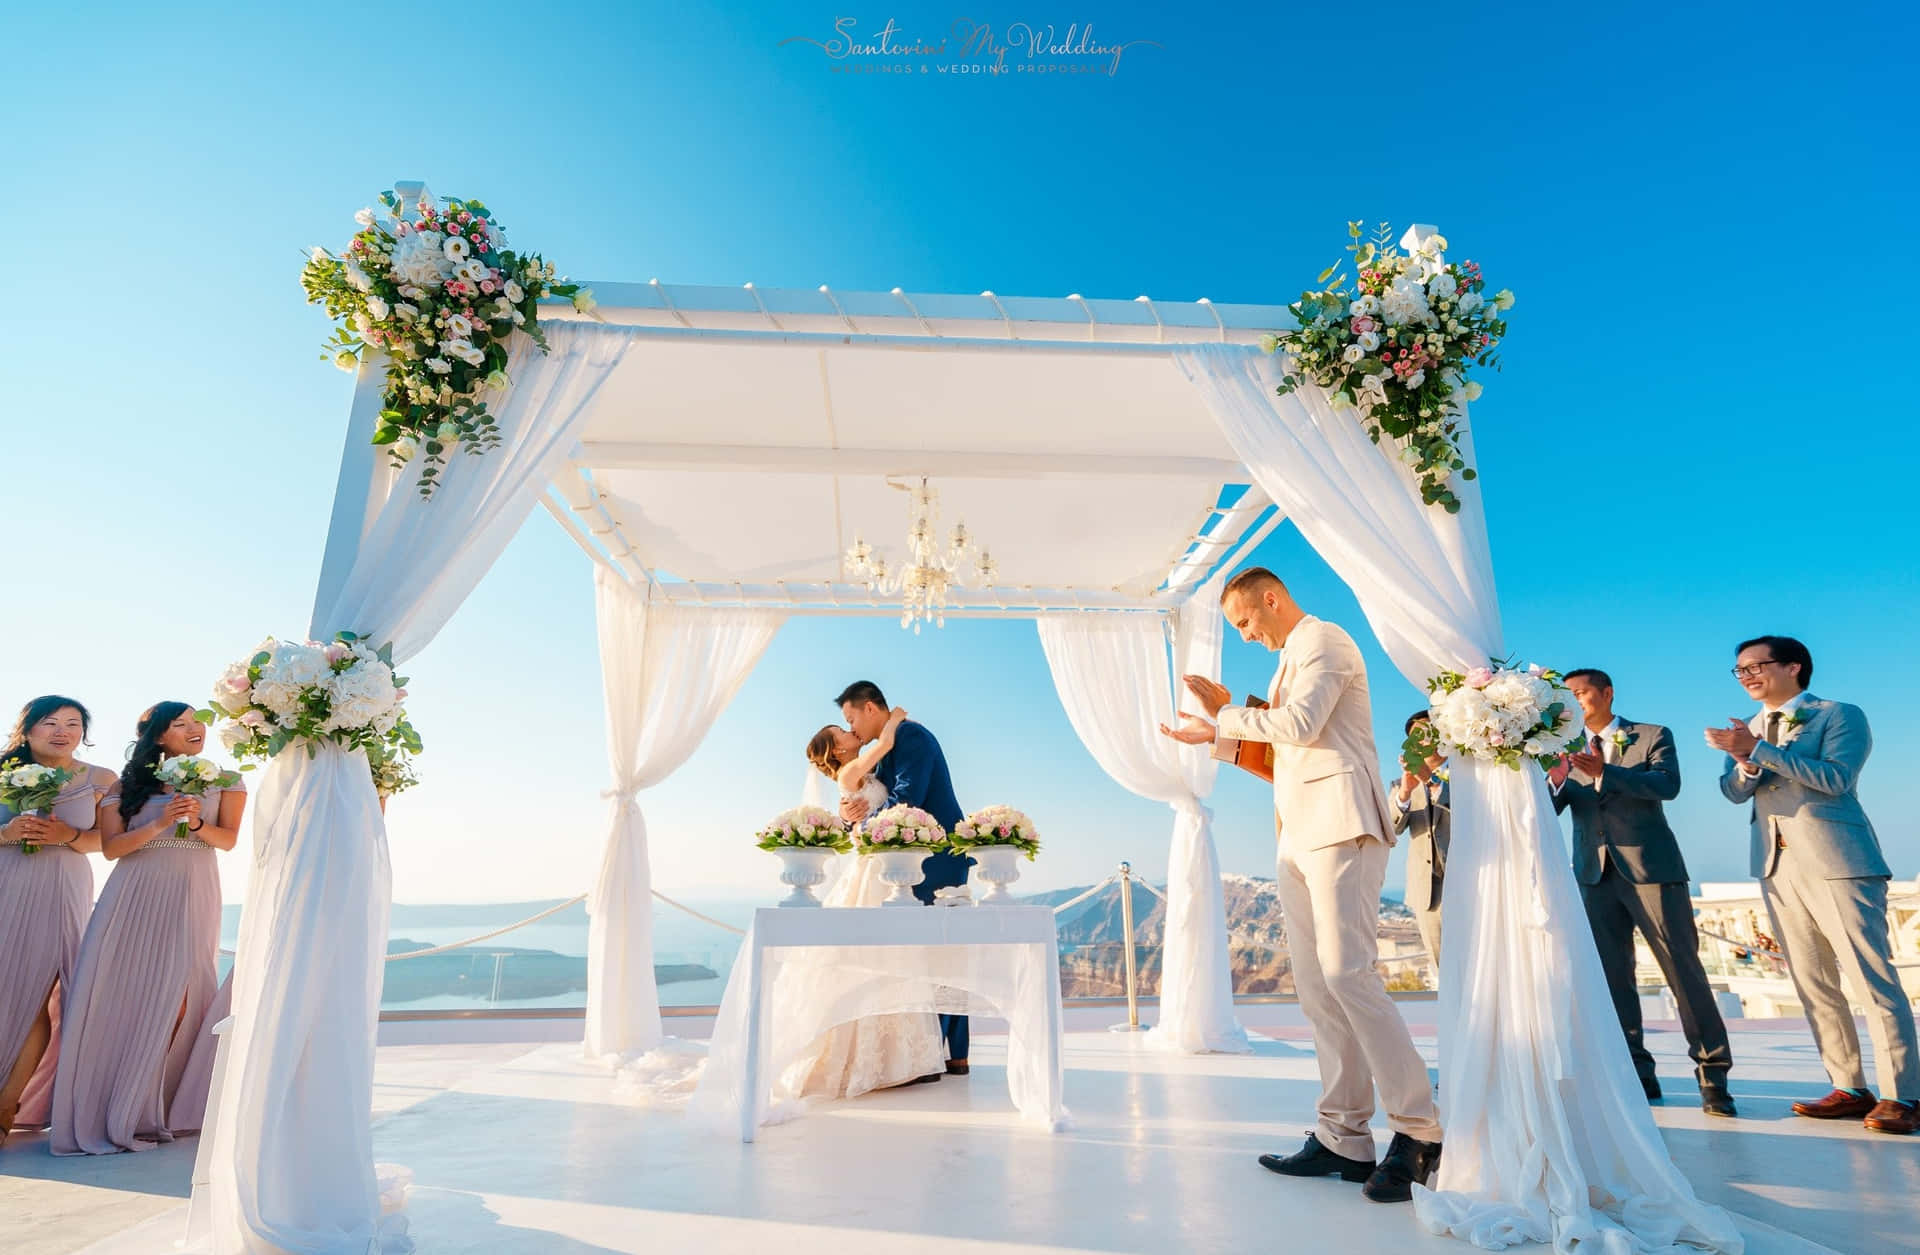 A Wedding Ceremony With A White Canopy And White Flowers